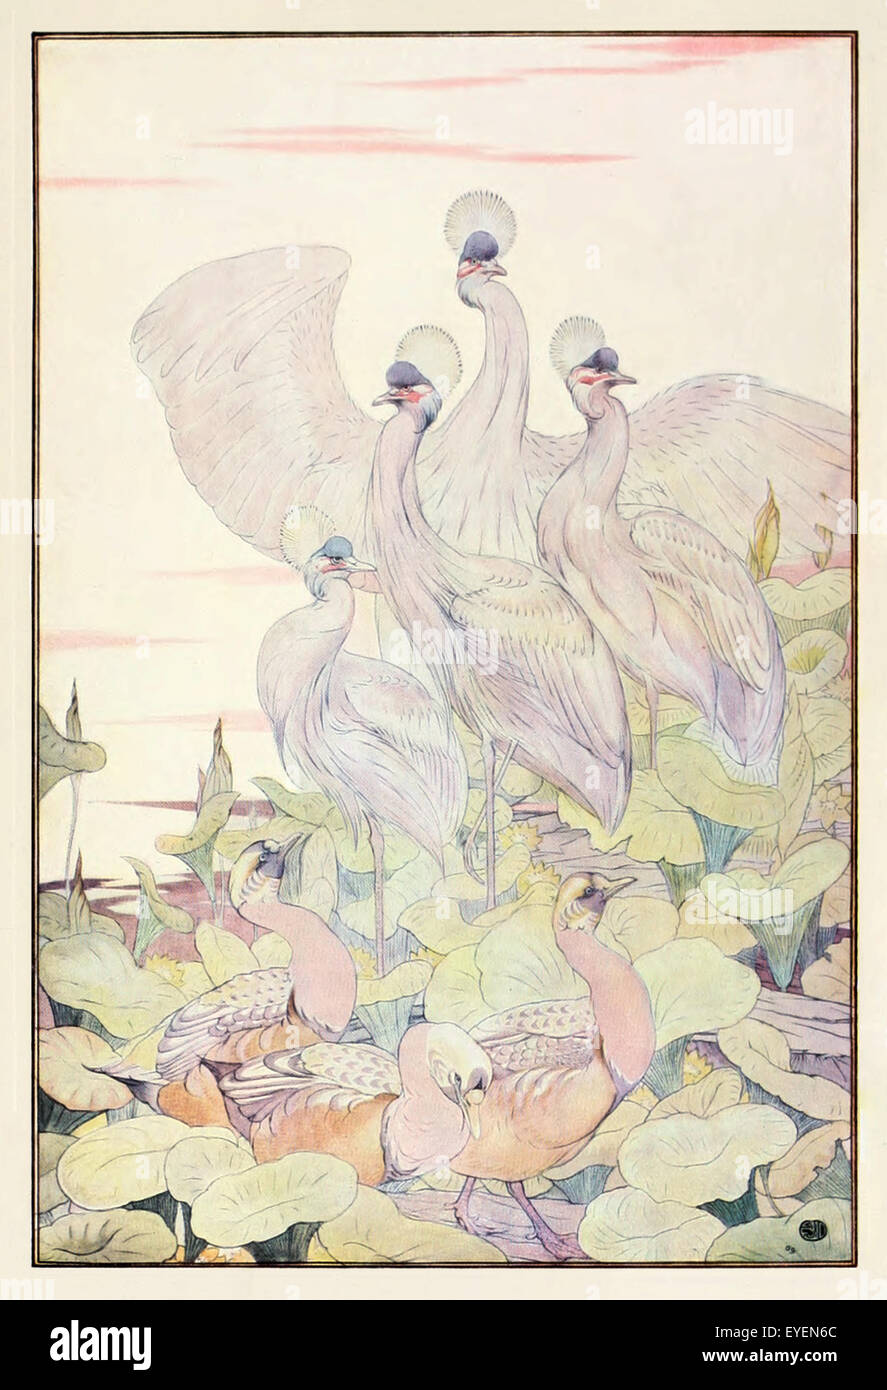 'The Geese and the Cranes' fable by Aesop (circa 600BC). Geese landed to feed with cranes. When scared, the lighter cranes fled but the geese were caught instead. The more vulnerable need to watch more closely. Illustration by Edward J. Detmold (1883-1957). See description for more information. Stock Photo